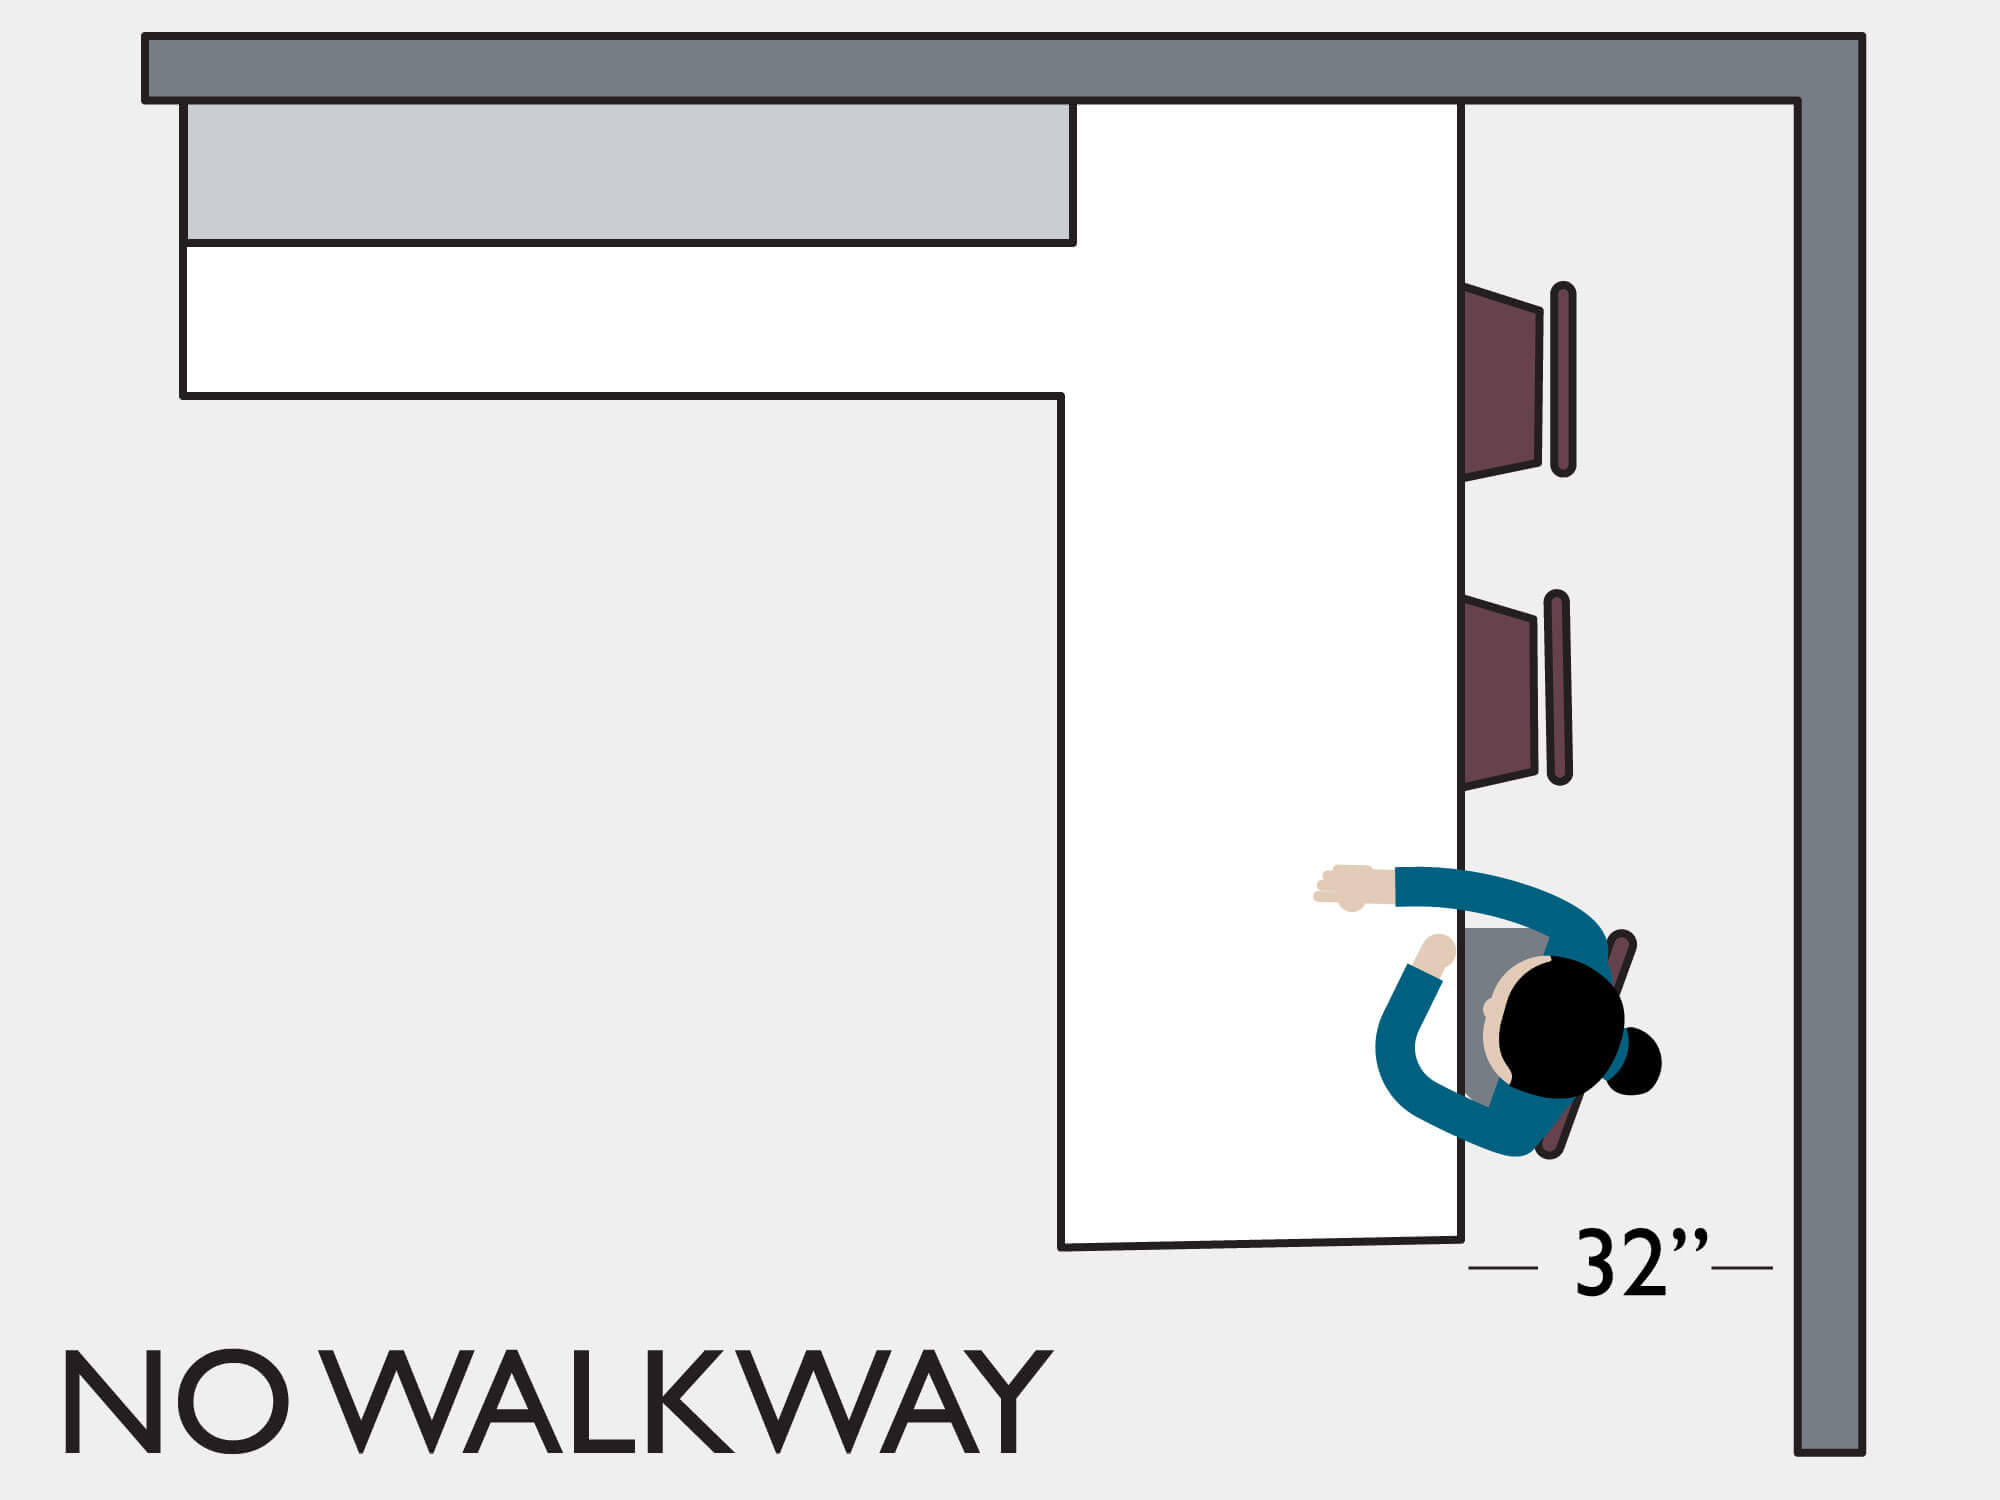 No walk way clearance guidelines showing a 32 inch wide space behind the kitchen seating.